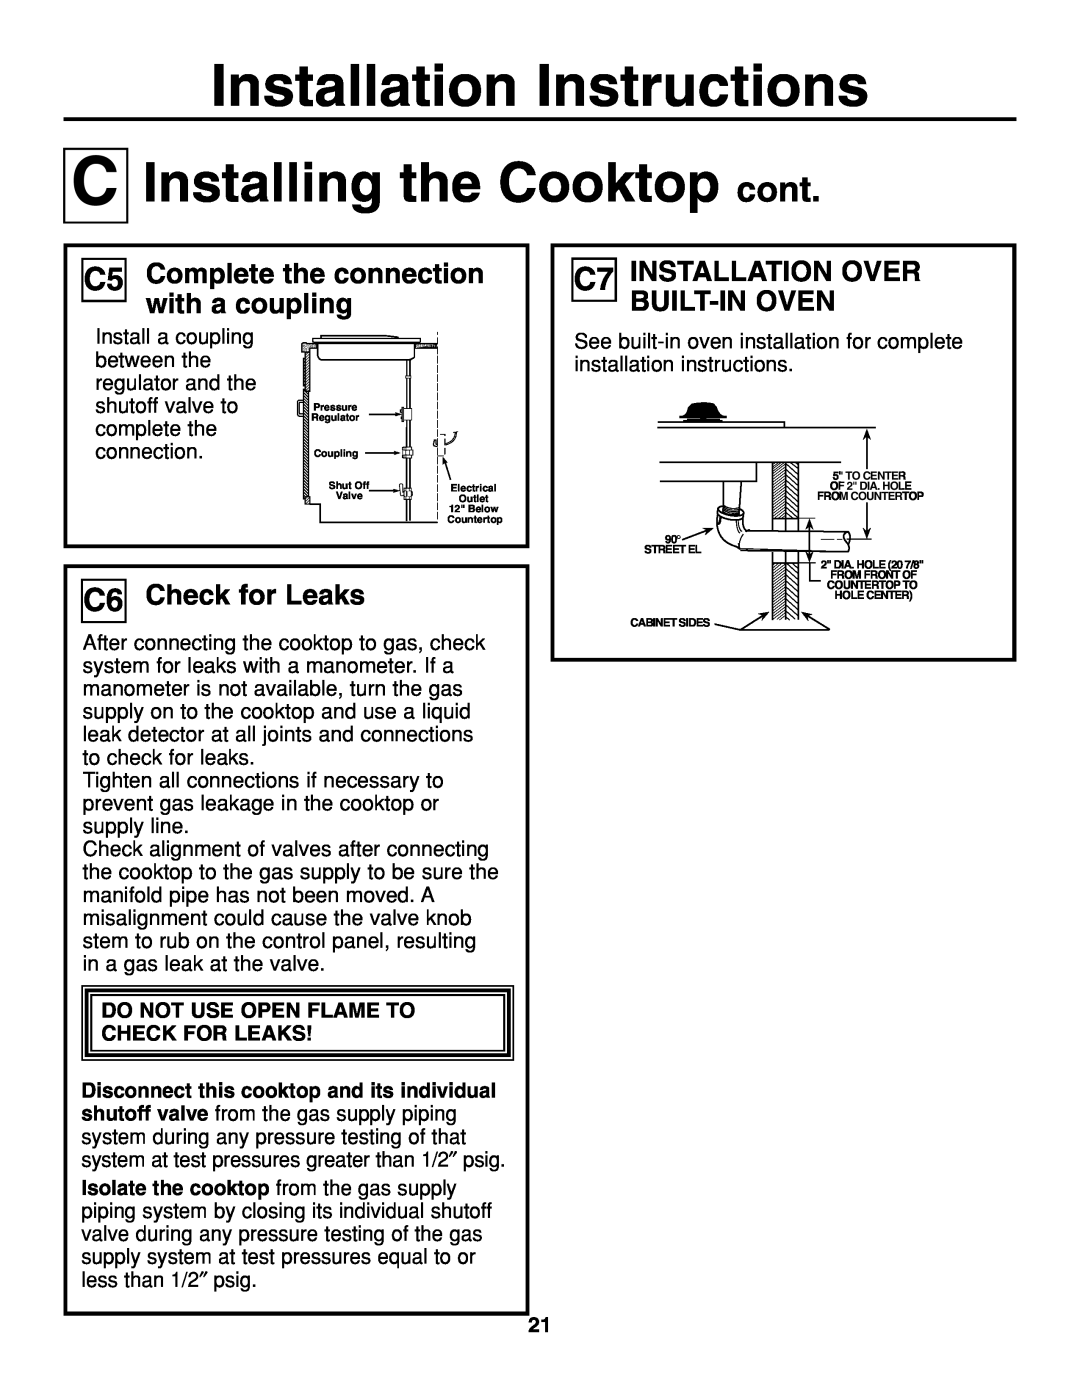 GE JGP337 Installing the Cooktop cont, C5 Complete the connection with a coupling, C7 INSTALLATION OVER BUILT-IN OVEN 